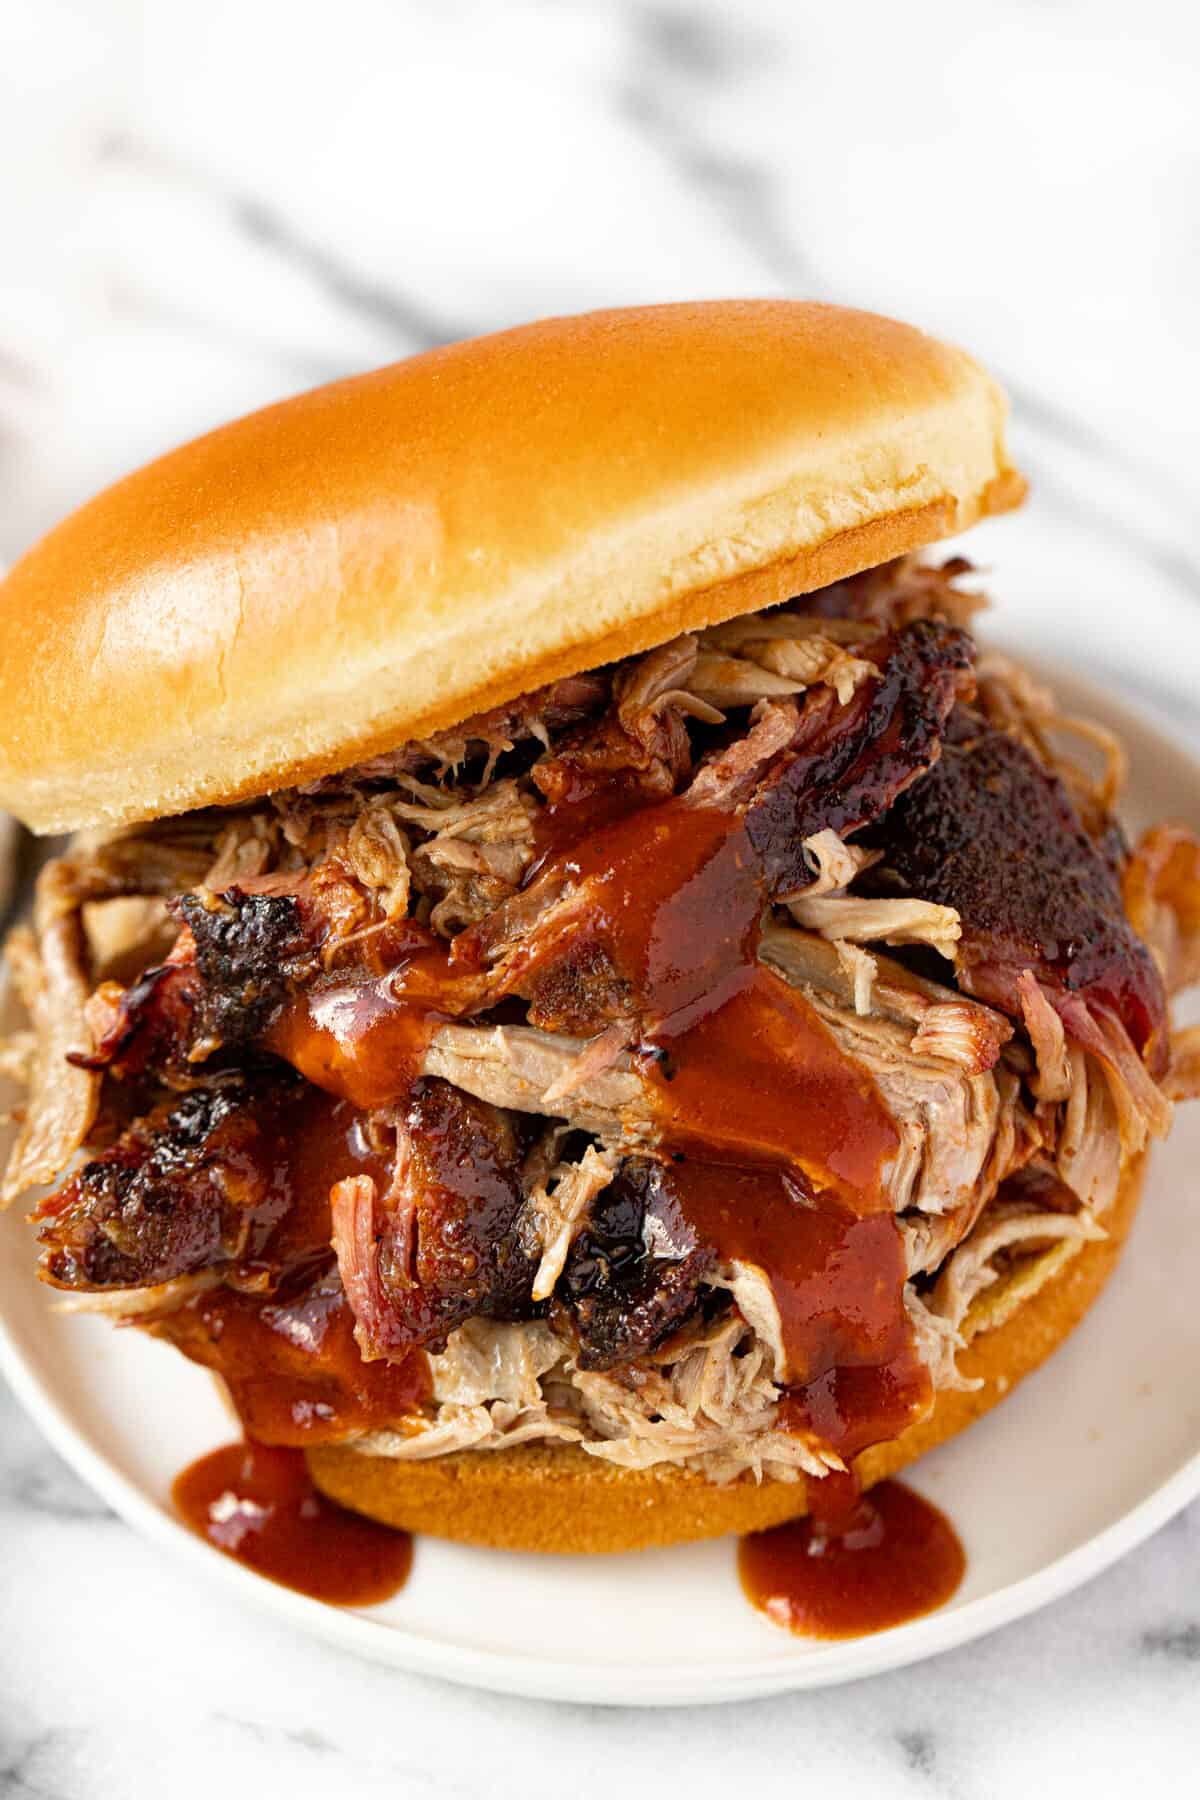 Pulled pork sandwich drizzled with barbecue sauce